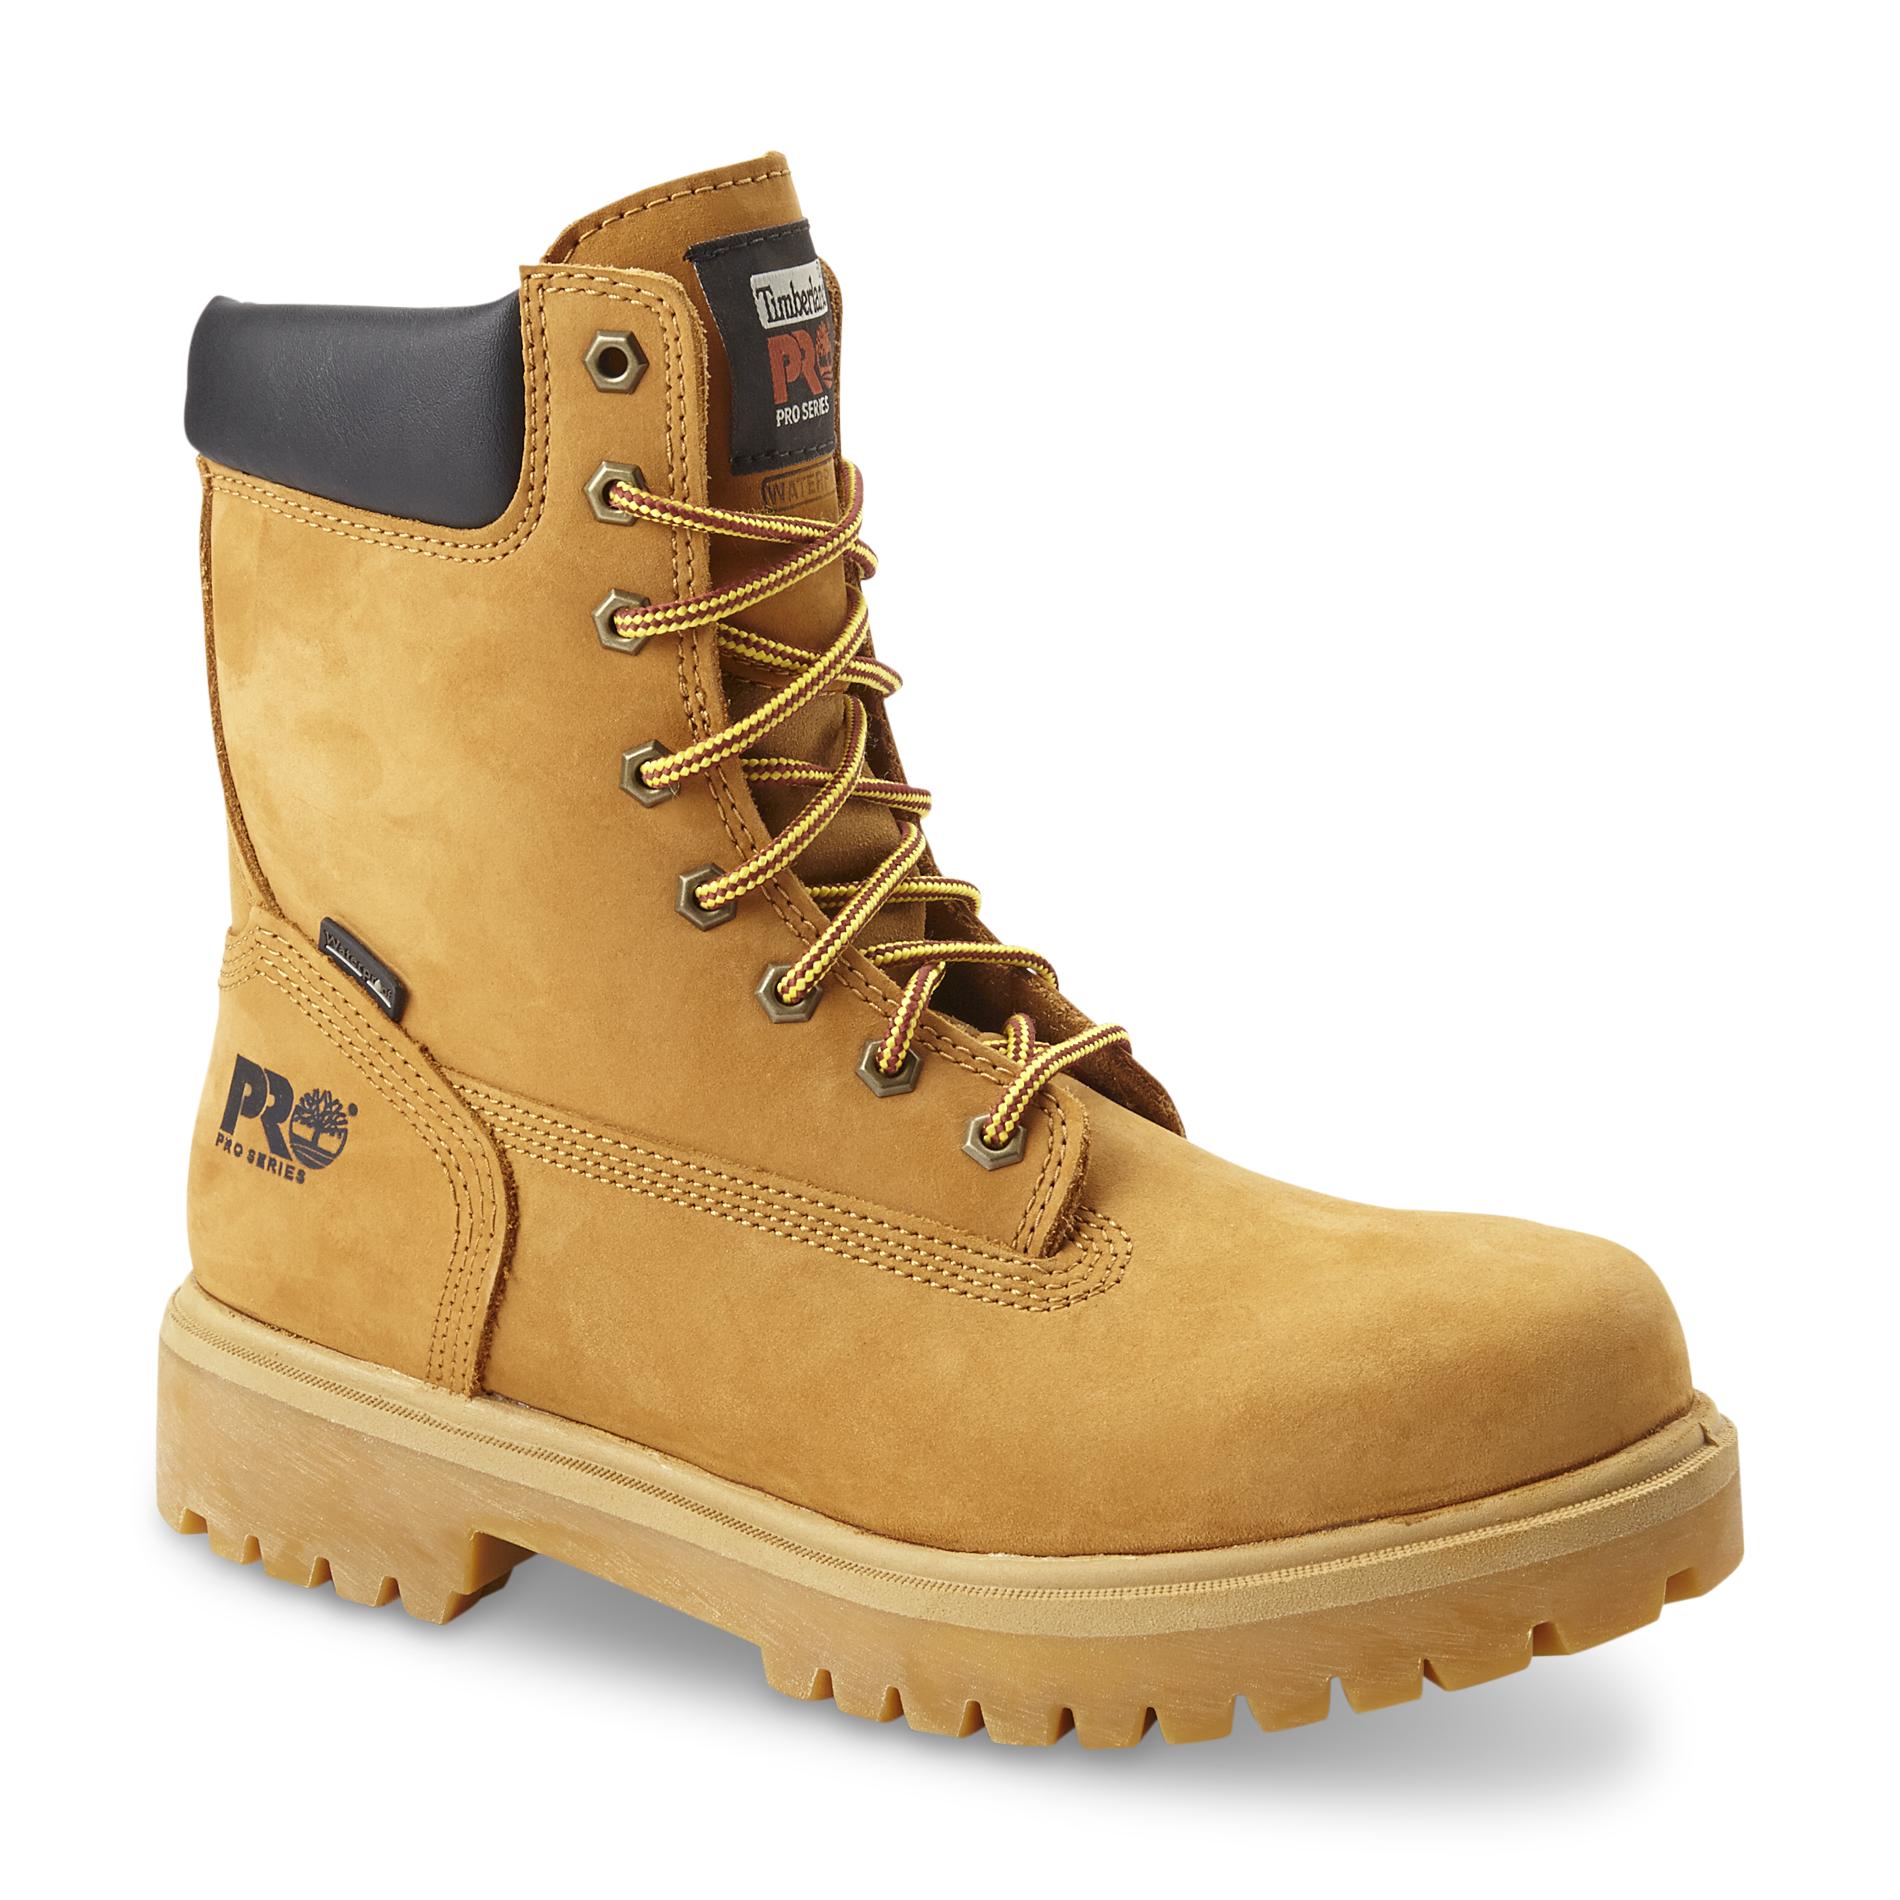 timberland pro boots sears cheap online